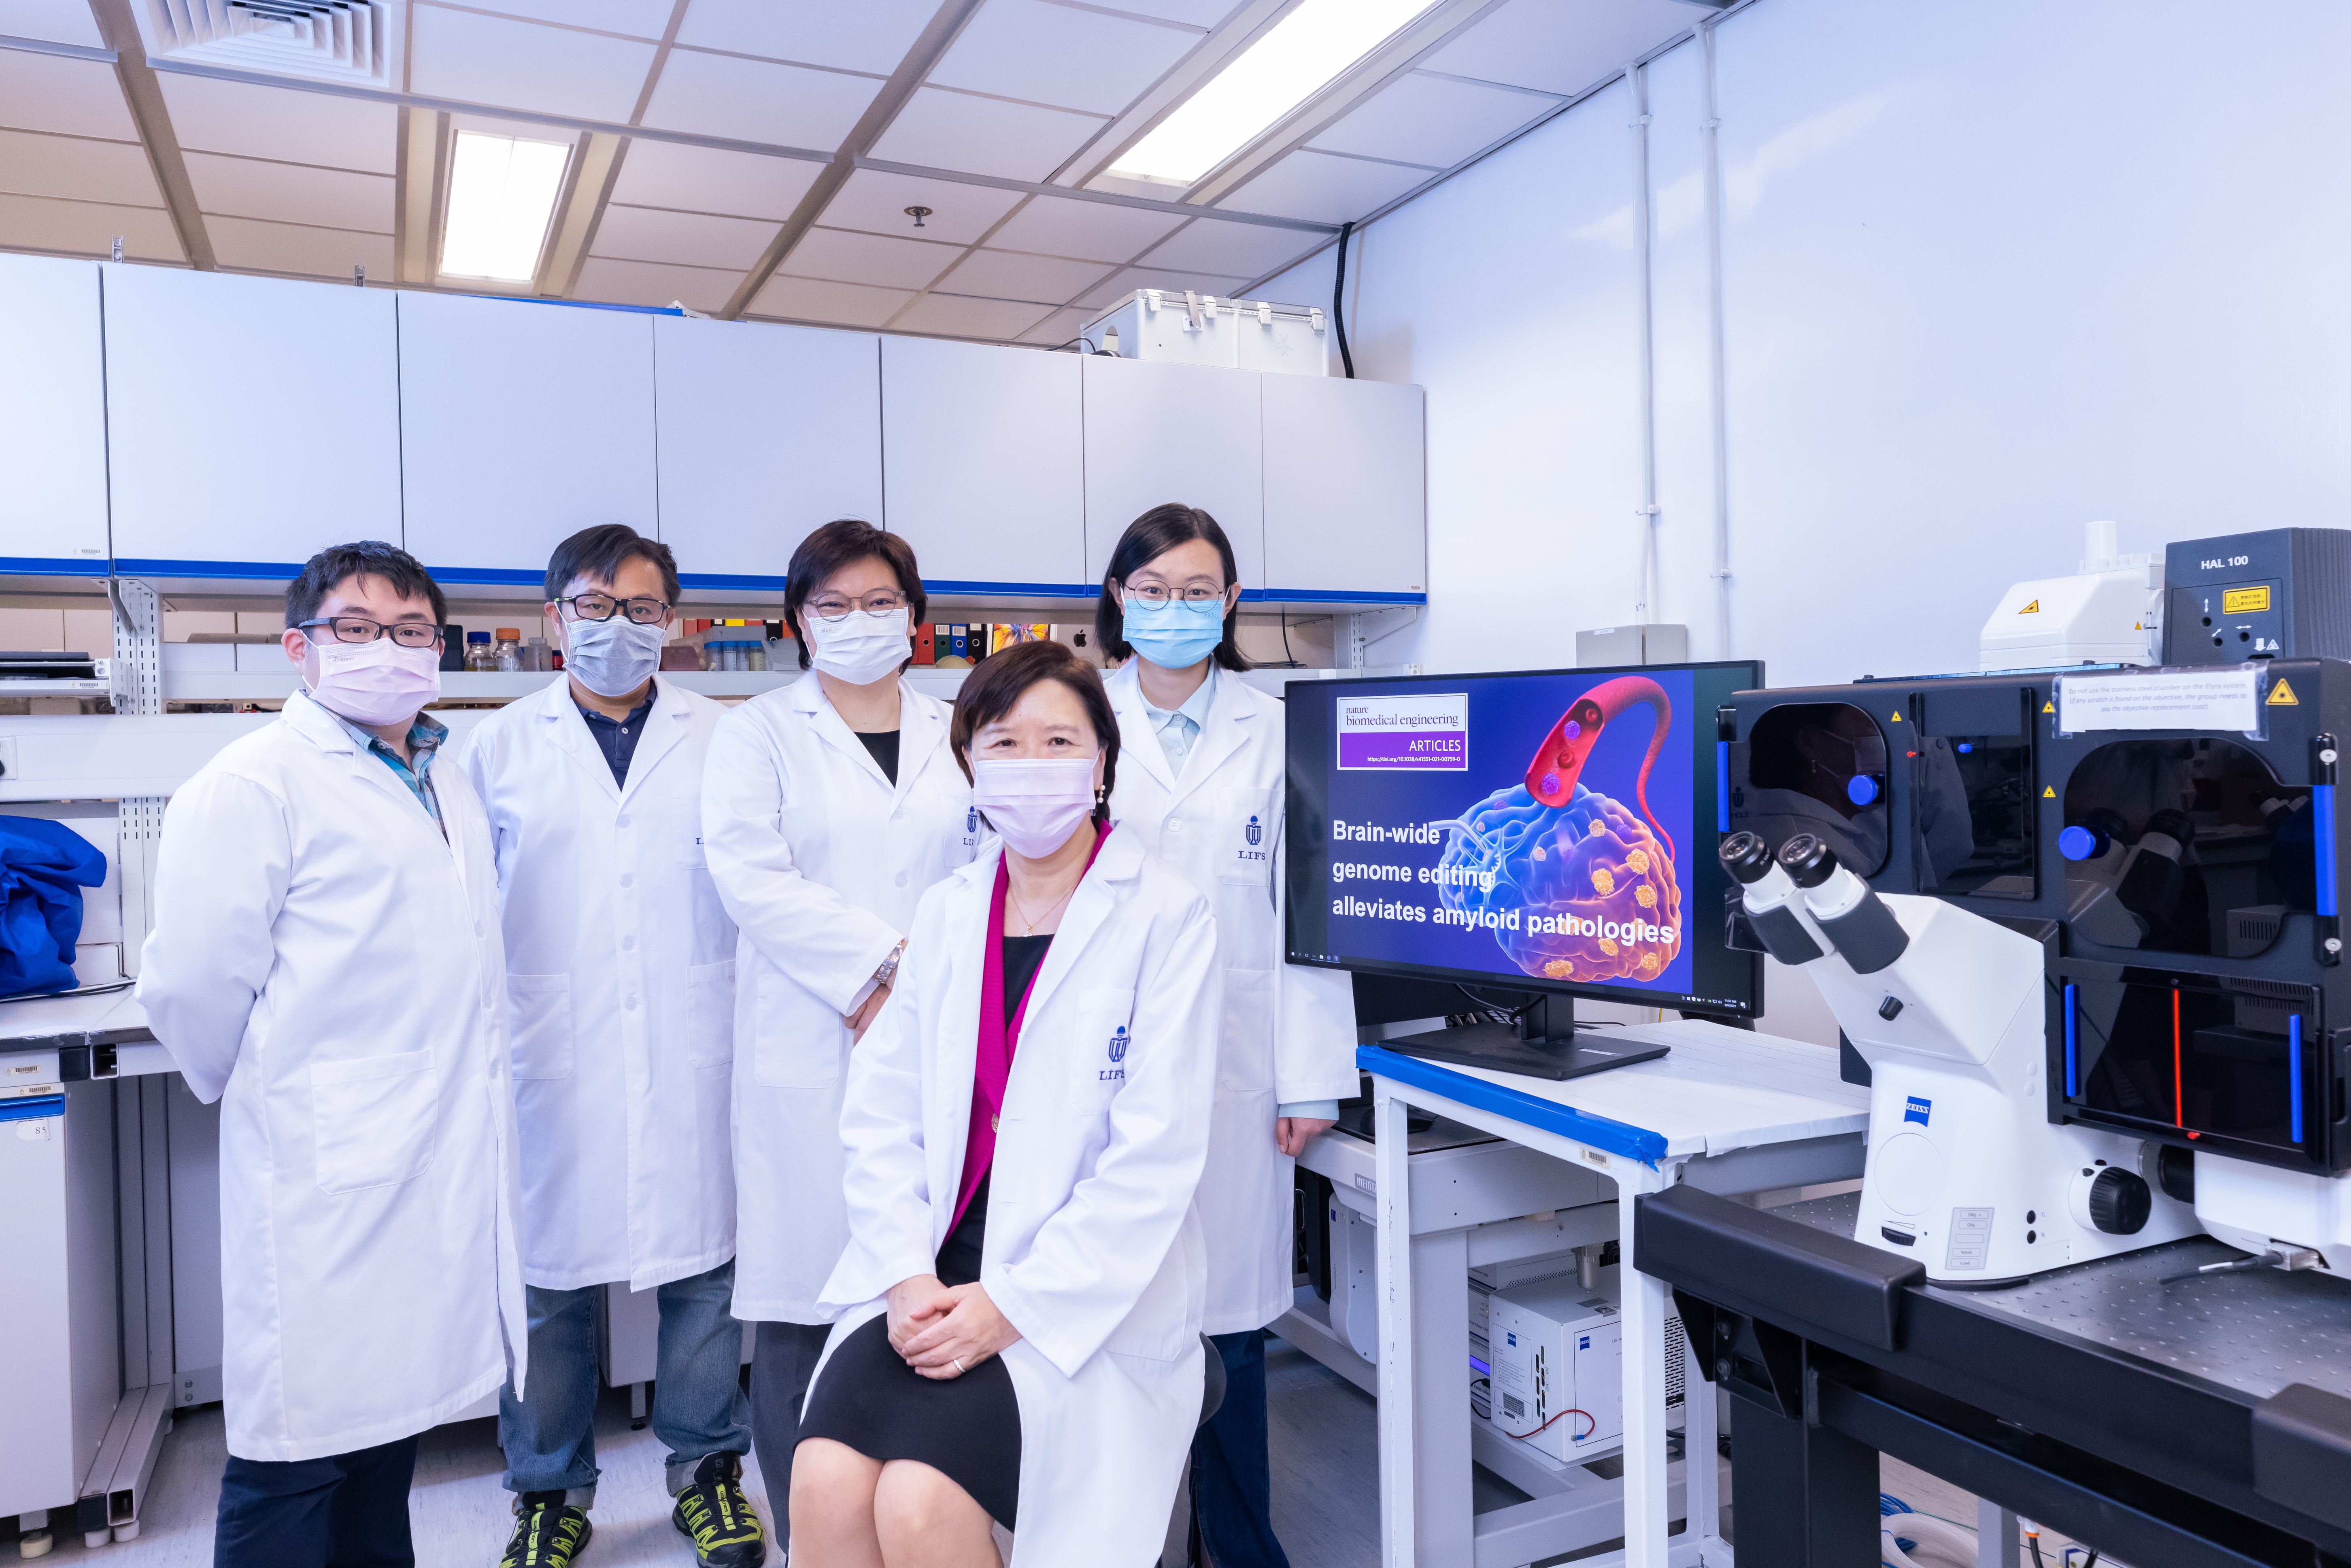 HKUST’s Vice-President for Research and Development, Prof. Nancy Ip (second right) and her research team members – including doctoral student and co-first author of this research paper, Ms. Stephanie DUAN Yangyang (first right) – used the confocal imaging system (pictured) to demonstrate how disruption of a familial Alzheimer’s disease mutation by genome editing strategy reduces disease pathology.